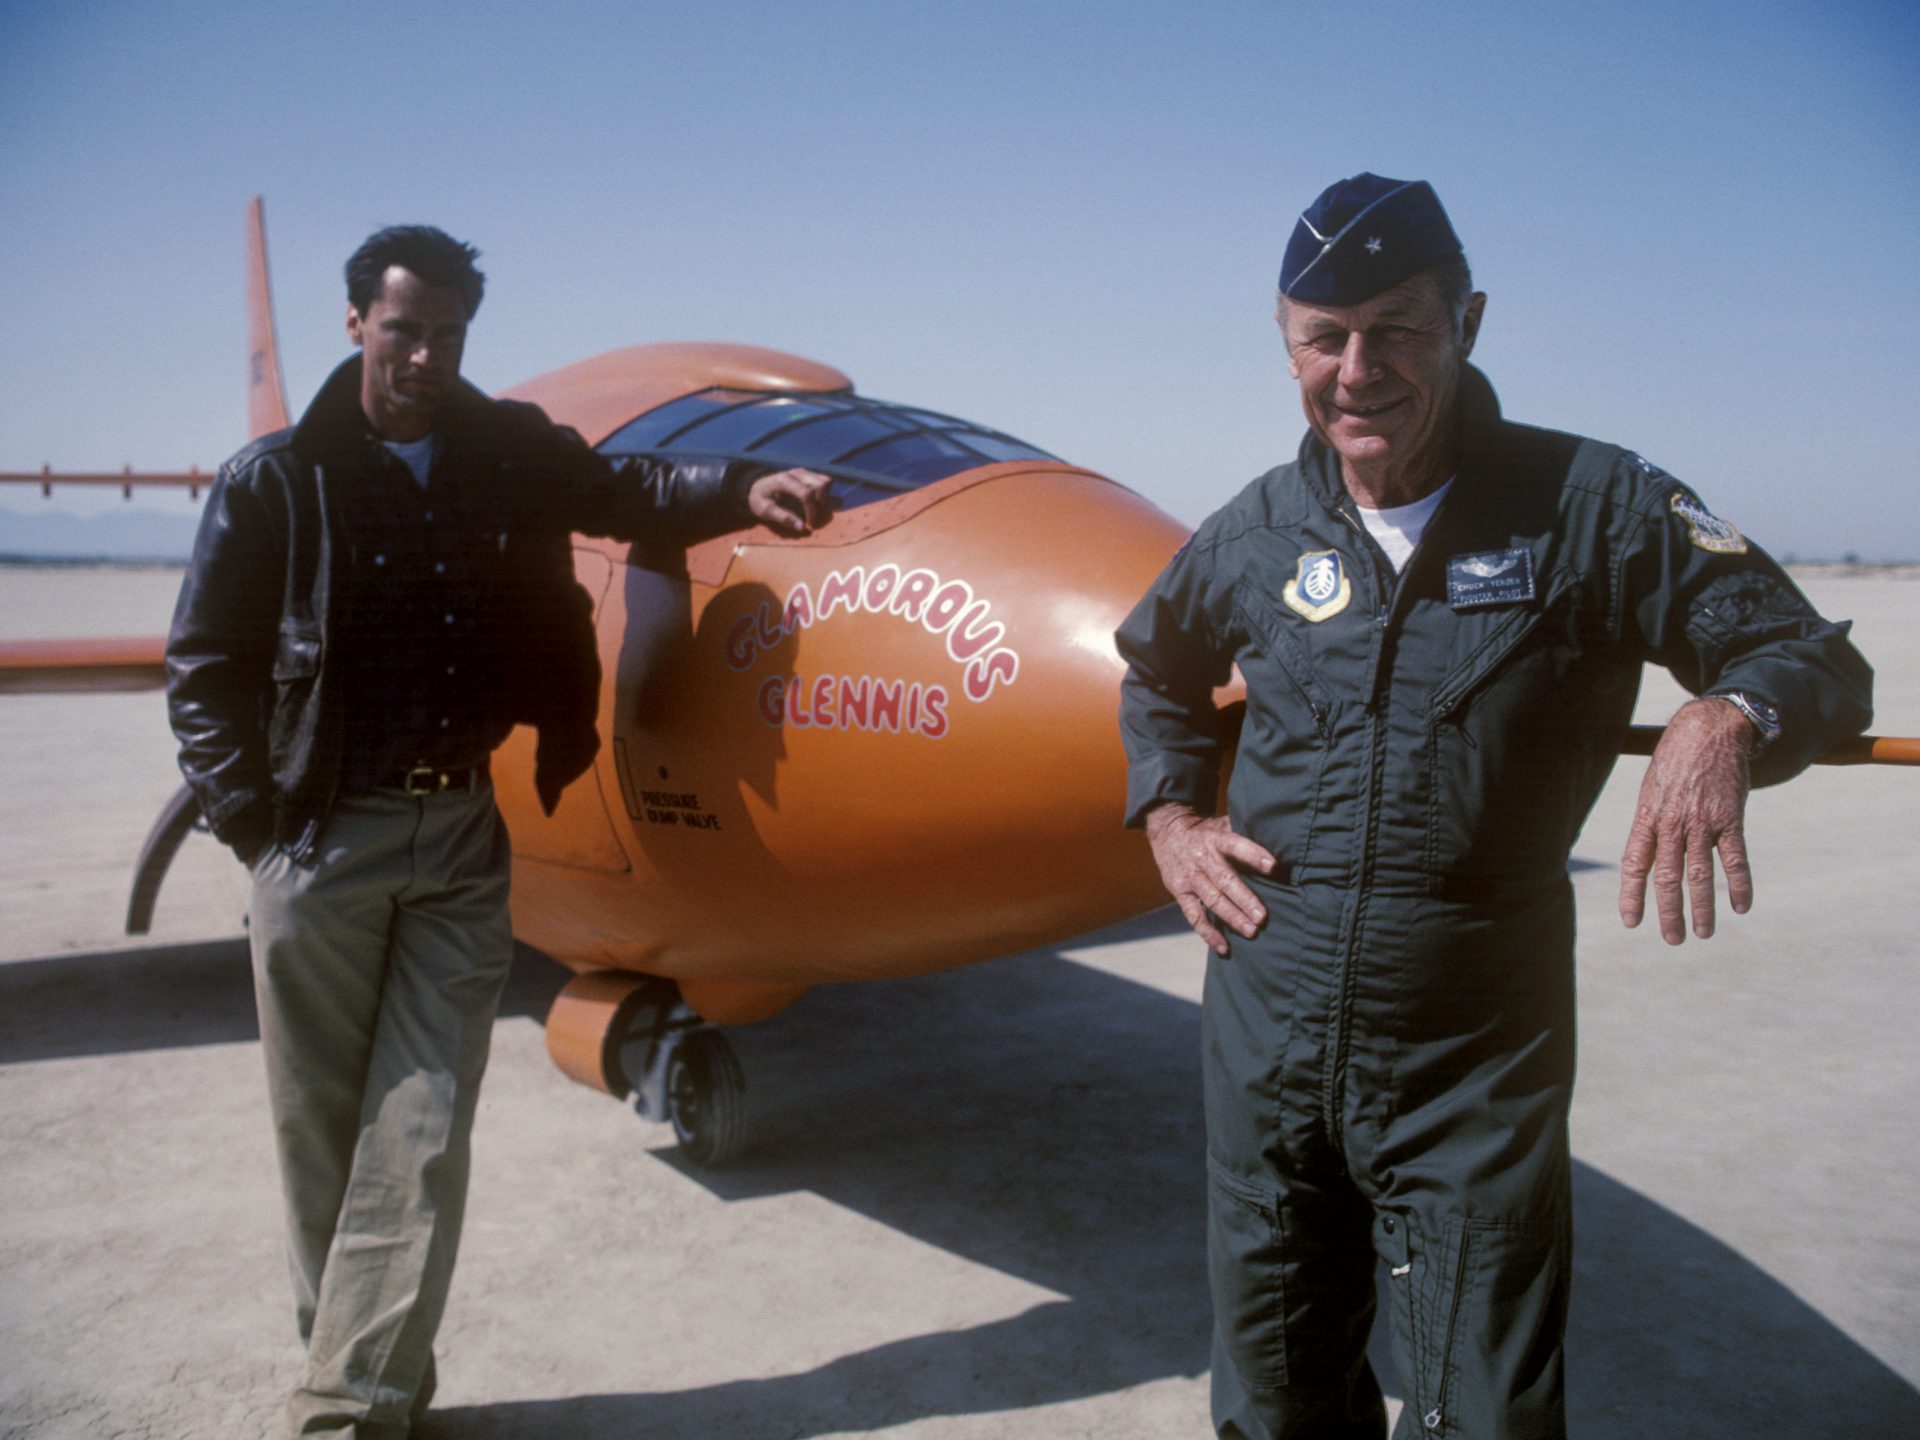 Chuck Yeager strikes a pose with Sam Shepard, who played him in the movie version of The Right Stuff.